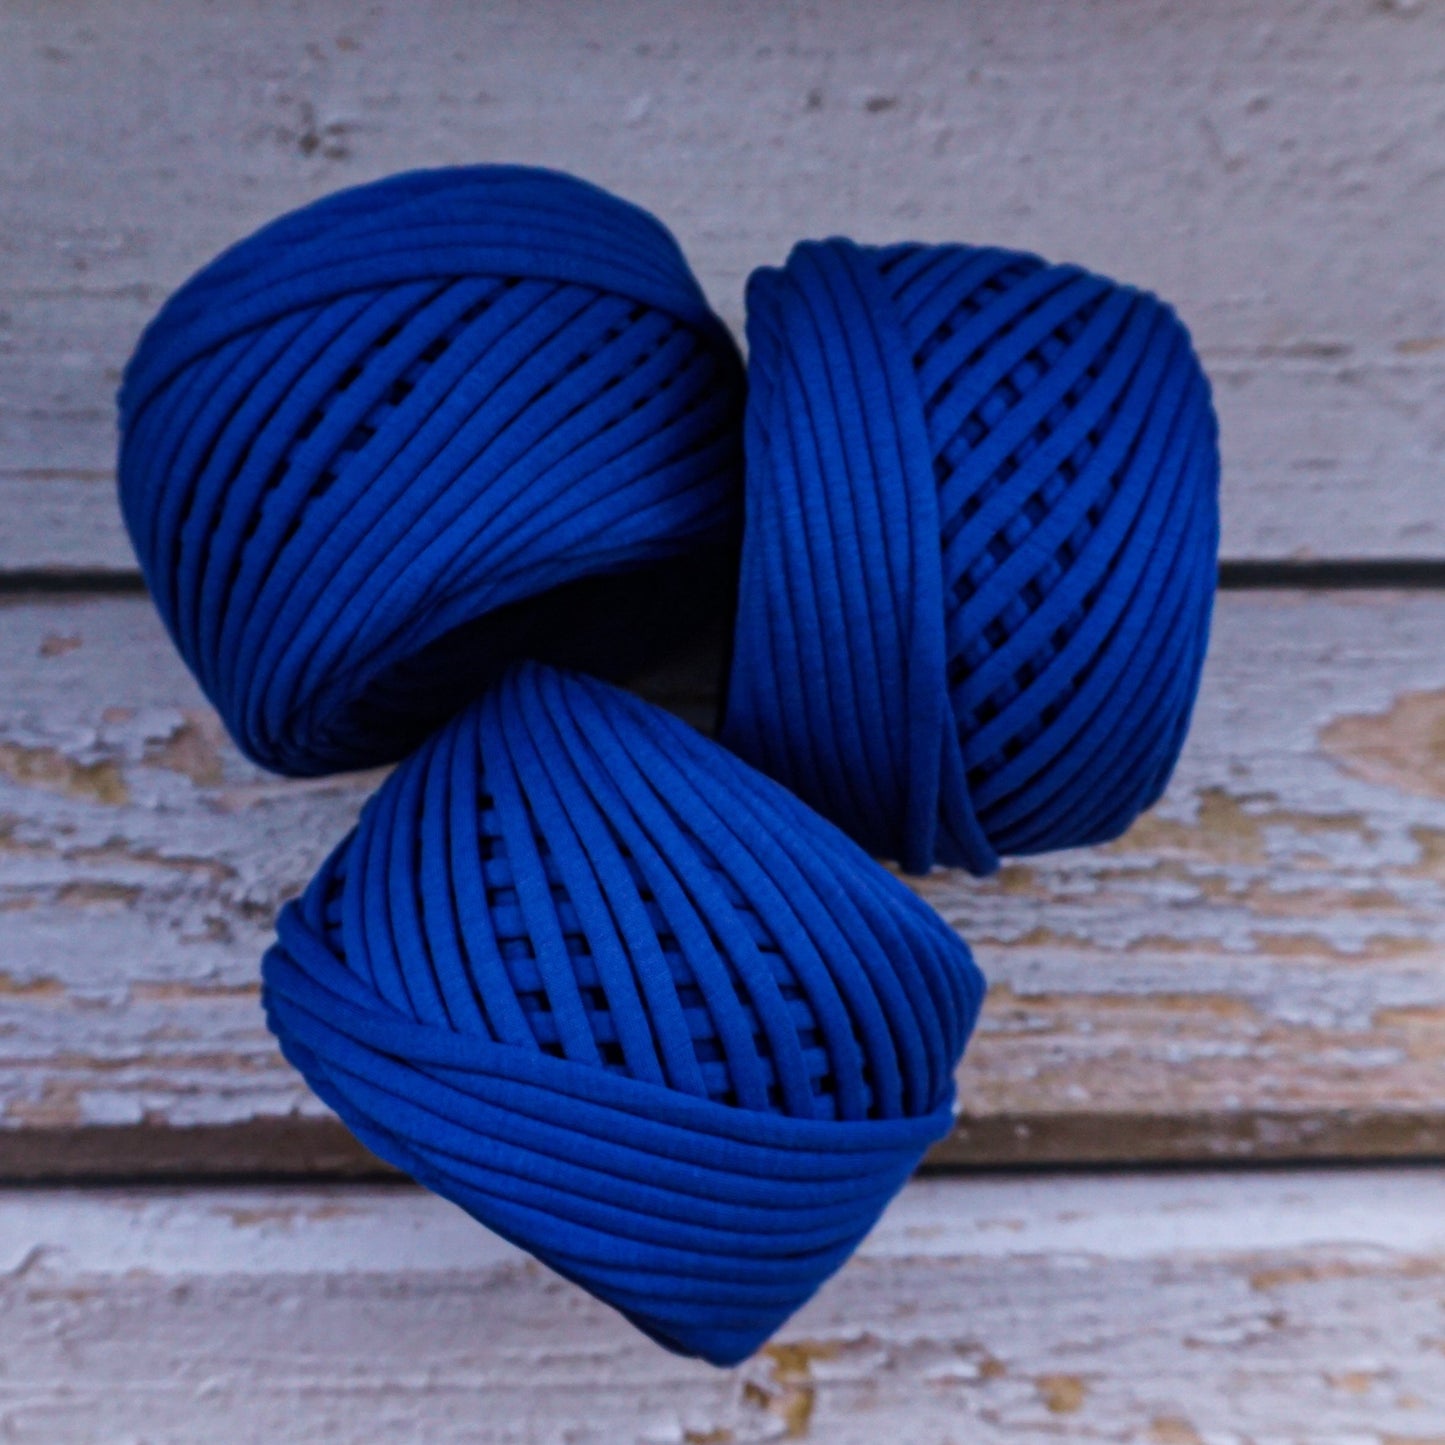 T-shirt yarn for crocheting baskets, bags, rugs and home decor.  Royal Blue